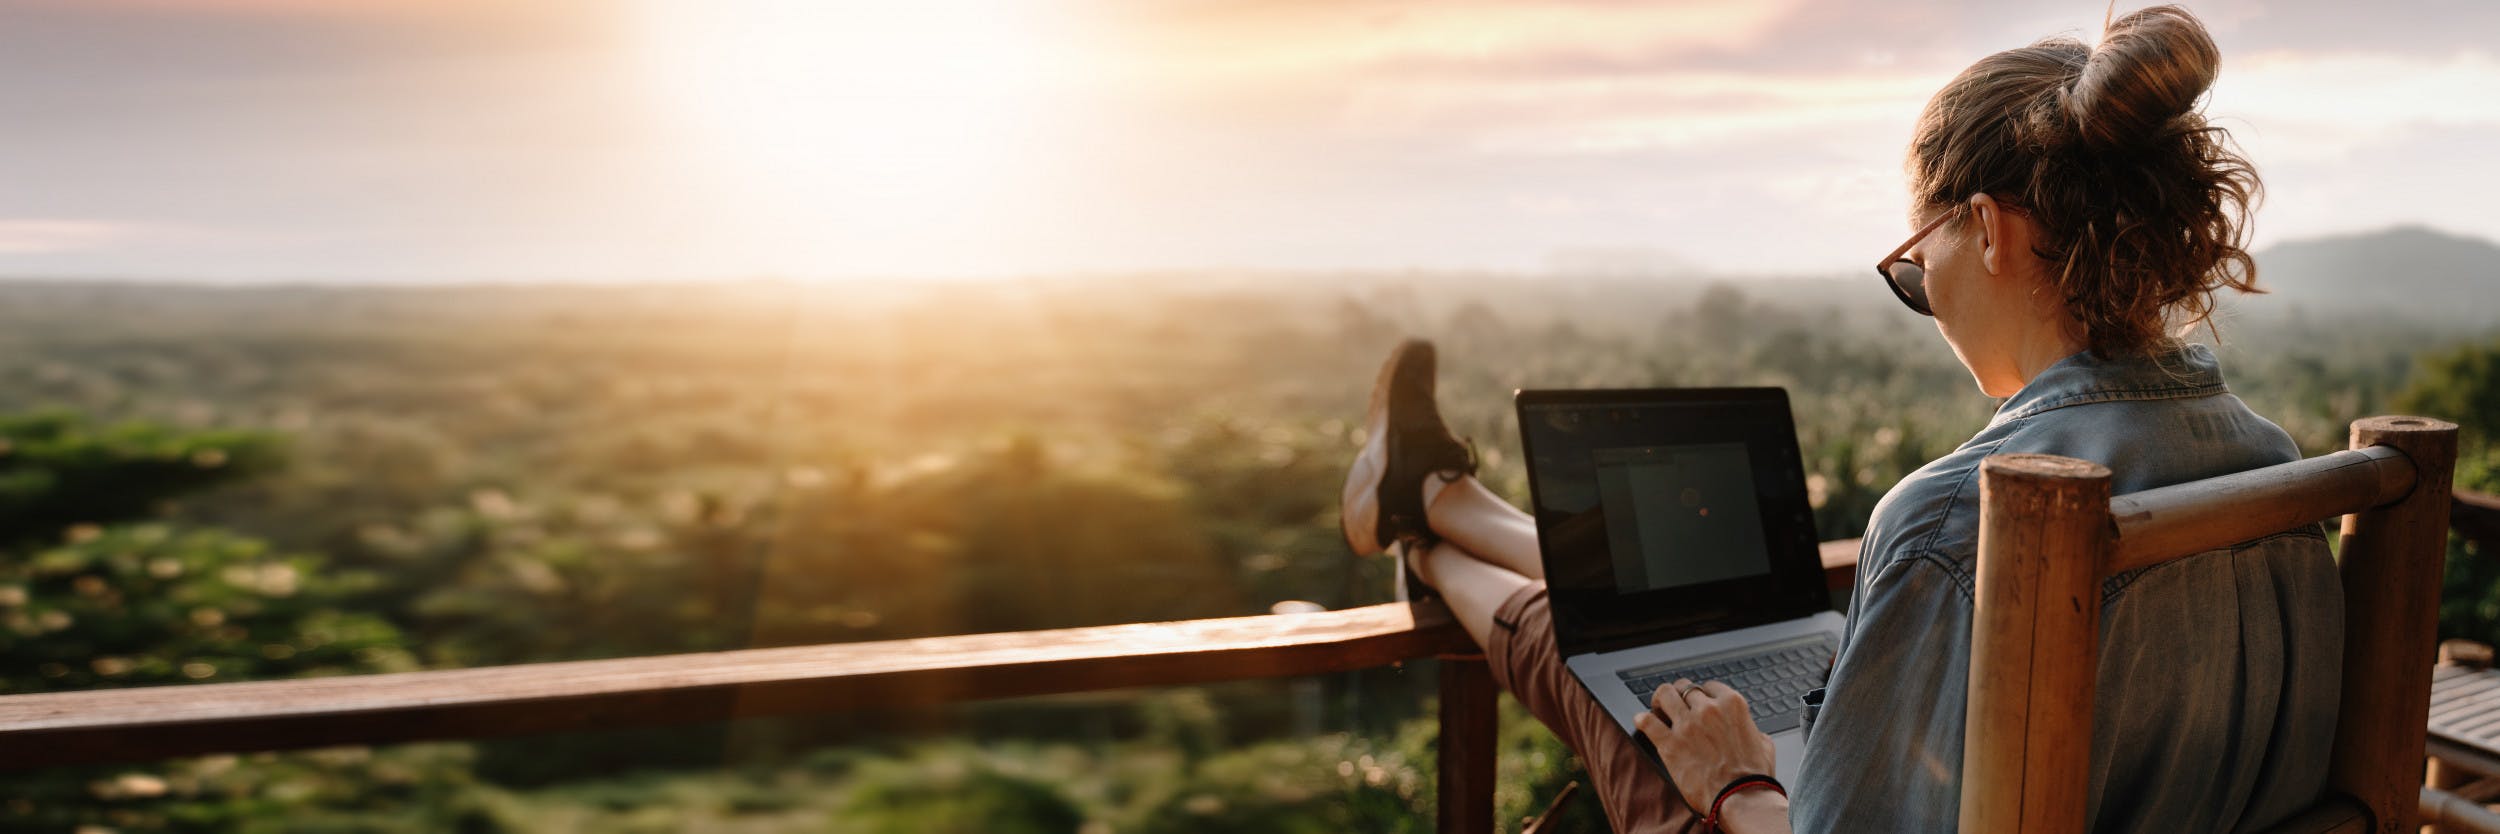 As A CEO, I Tried The “Work From Anywhere” Model — Here’s What I Learned